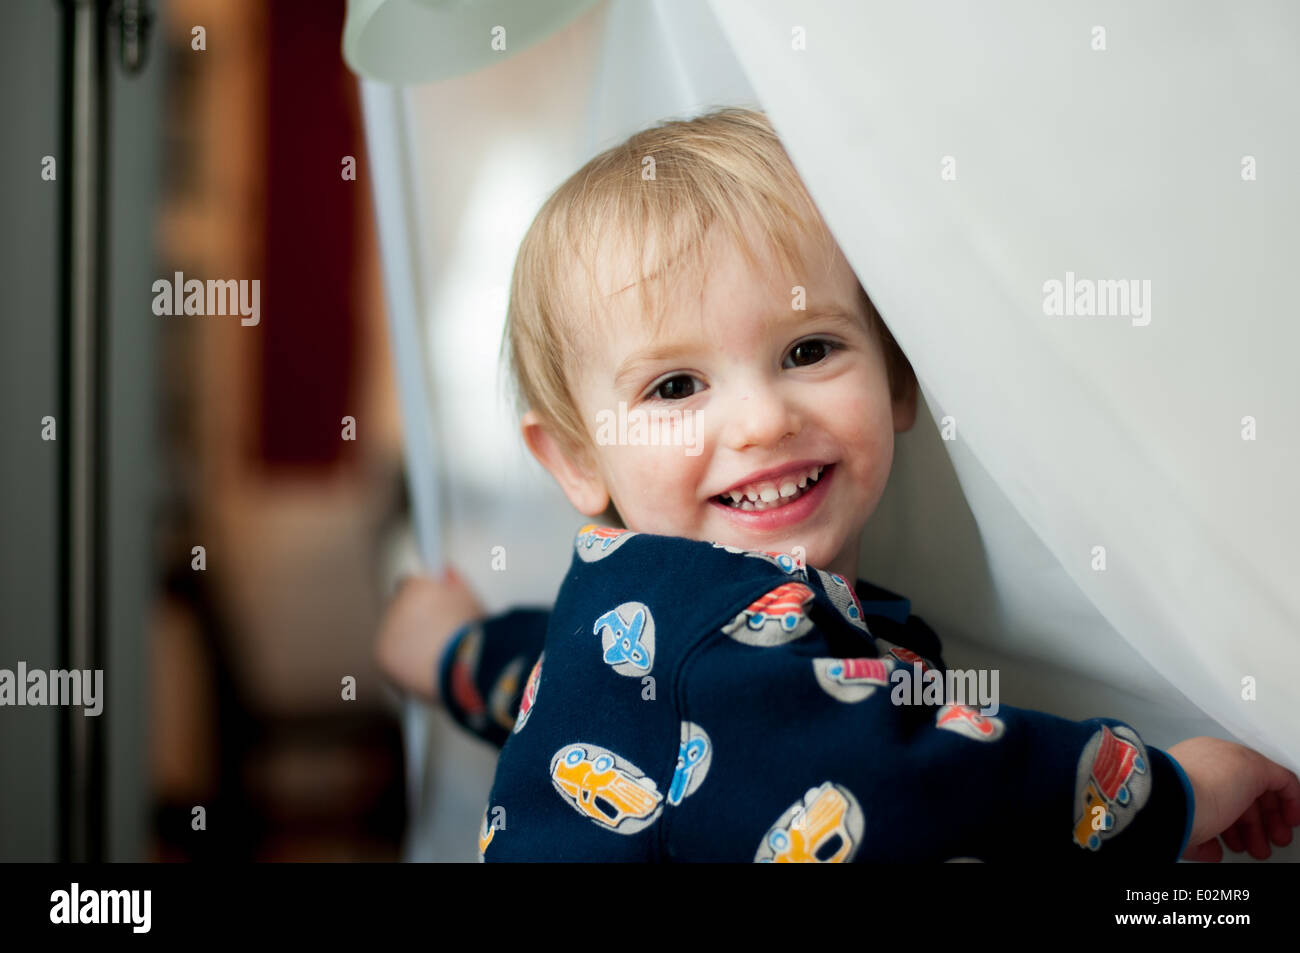 A blond toddler boy smiles while playing with a white curtain by a window. Stock Photo